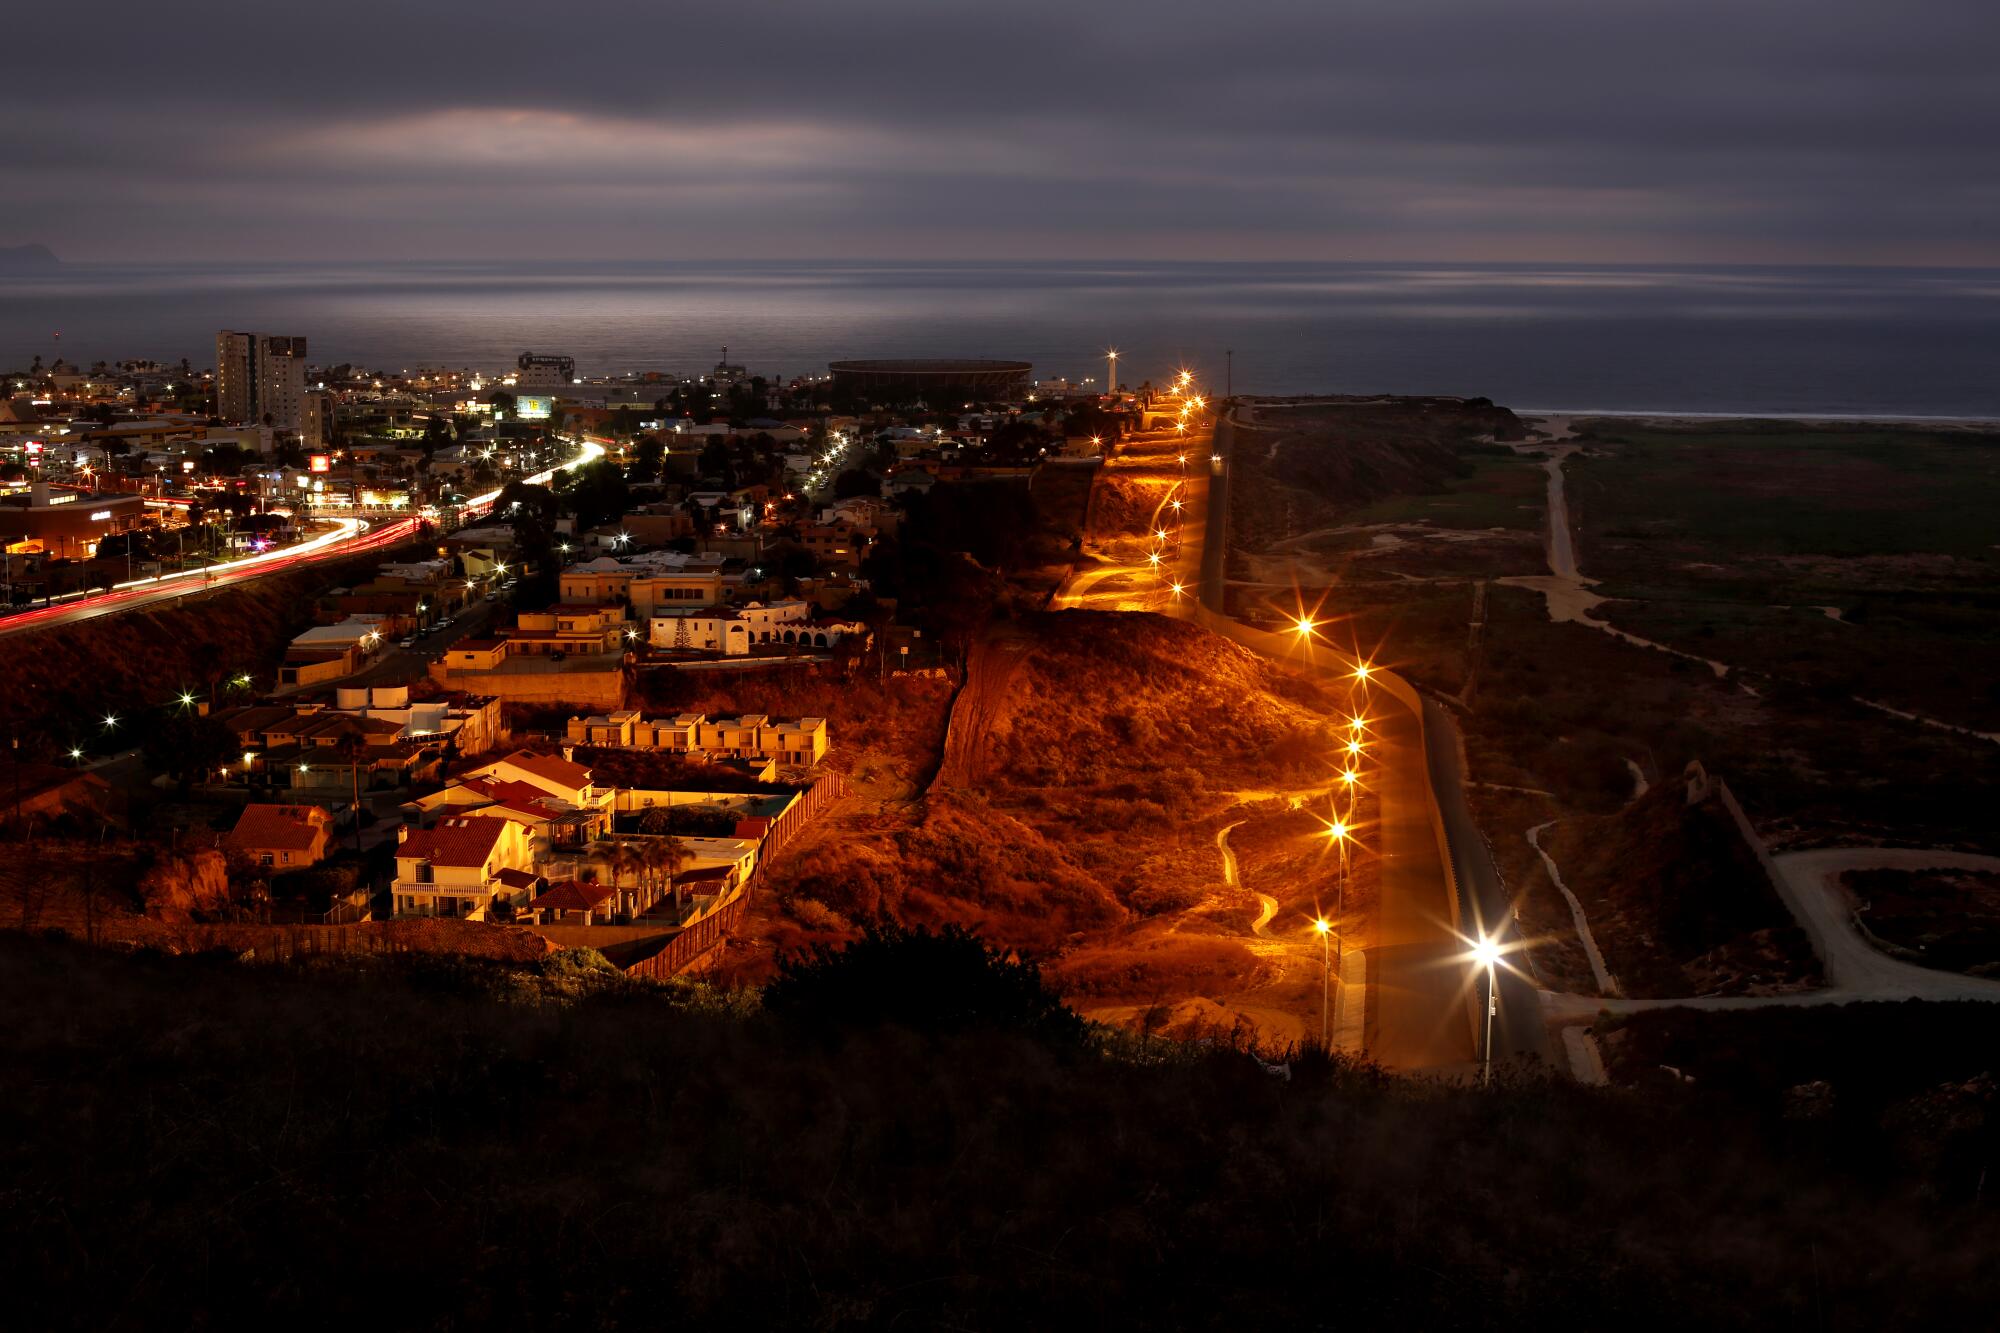 Lights show the winding path of double fencing between Tijuana and San Diego after sunset. 